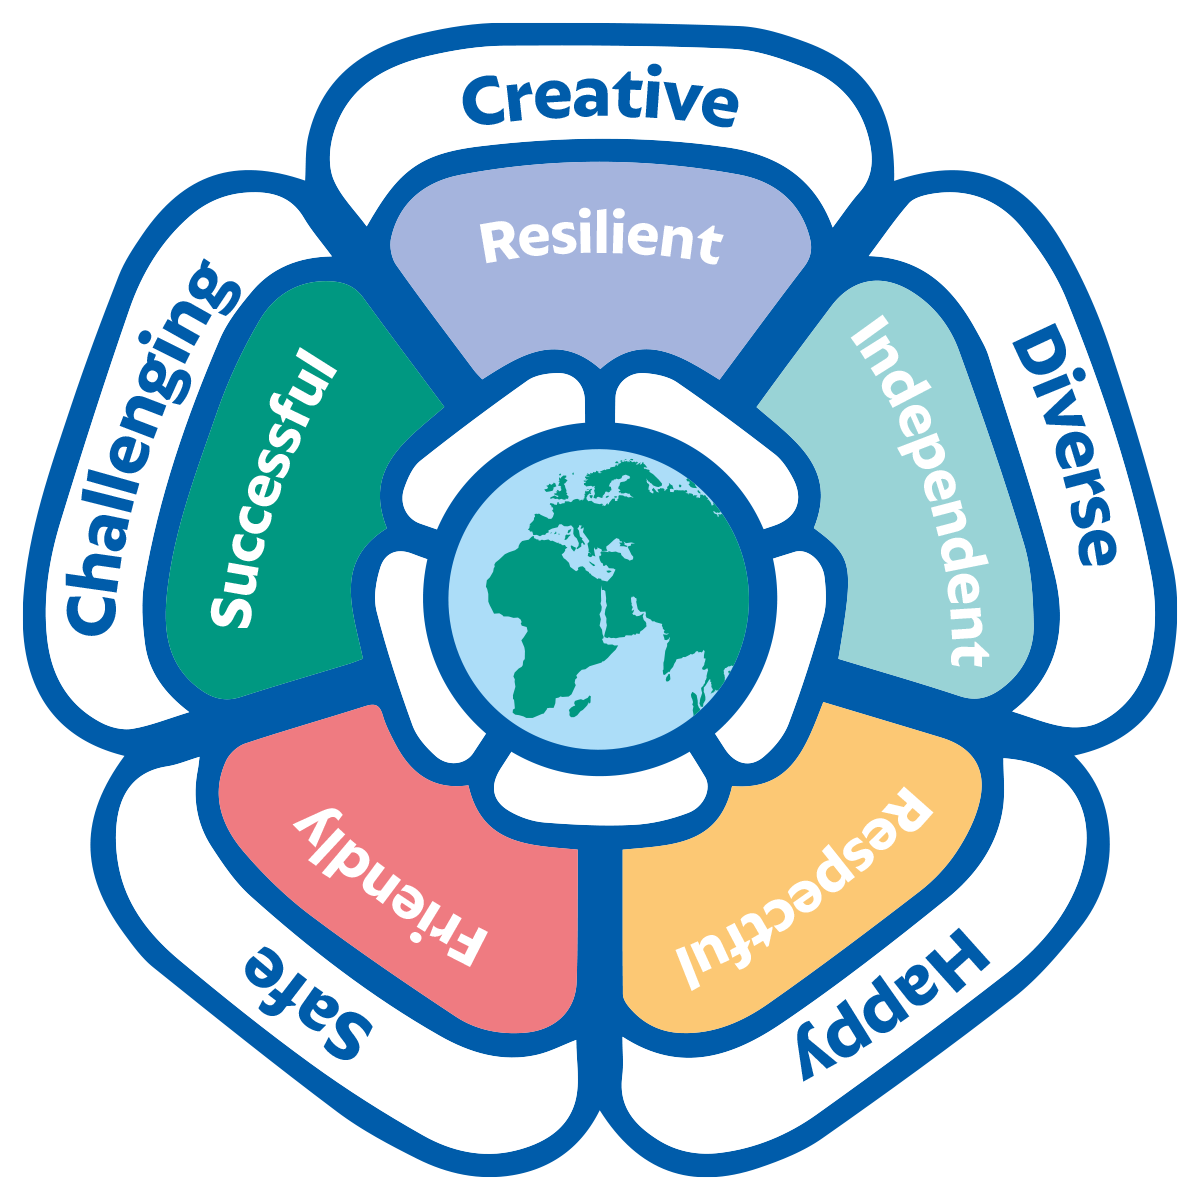 A blue on white outline of a Yorkshire Rose. In the outer 'petals' are the words Creative, Diverse, Happy, Safe and Challenging. In the Inner petals are the words Resilient, Independent, Respectful, Friendly and Successful. At the centre is an image of the world.